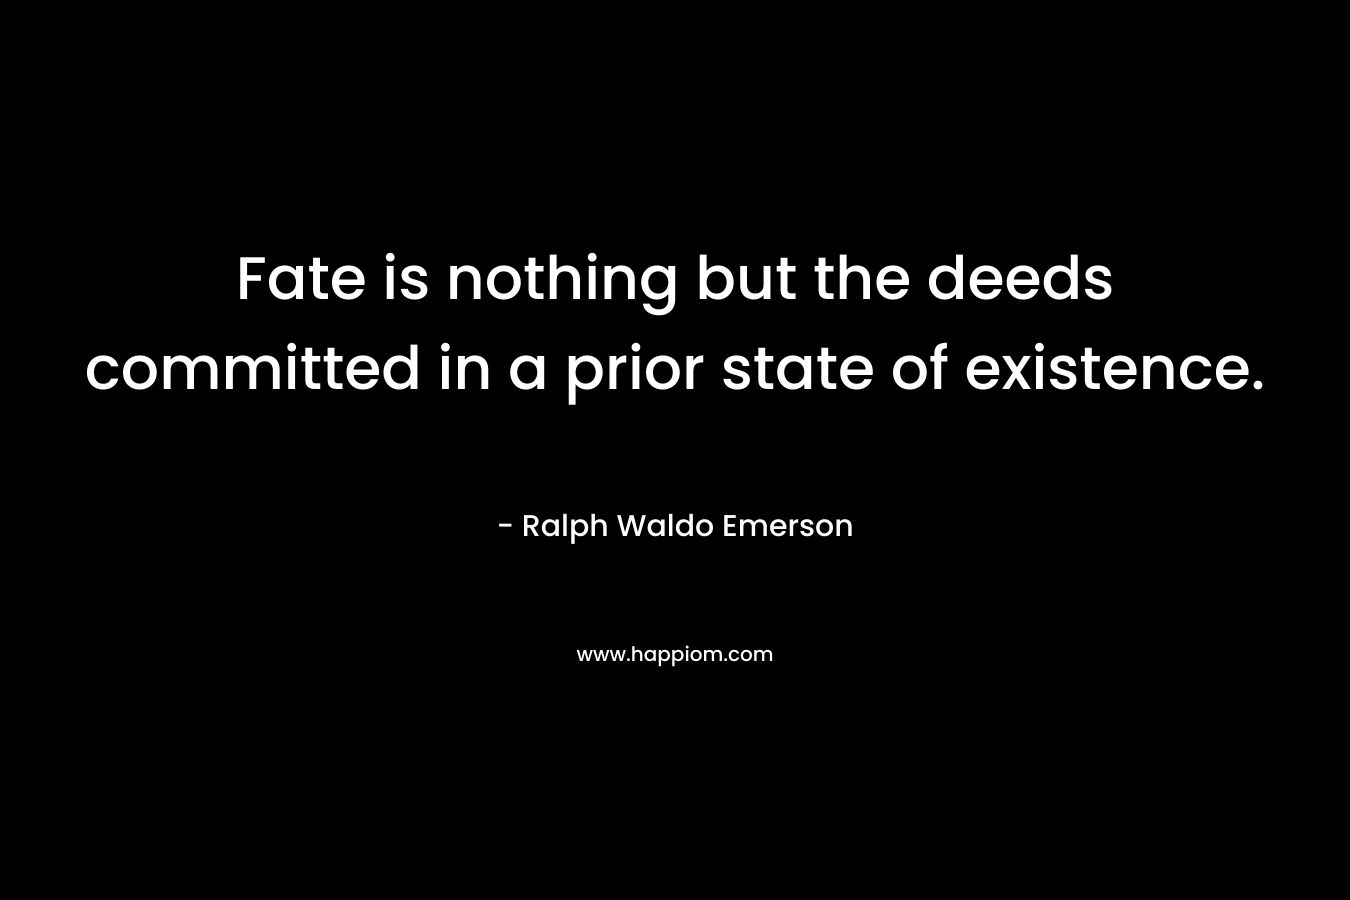 Fate is nothing but the deeds committed in a prior state of existence.